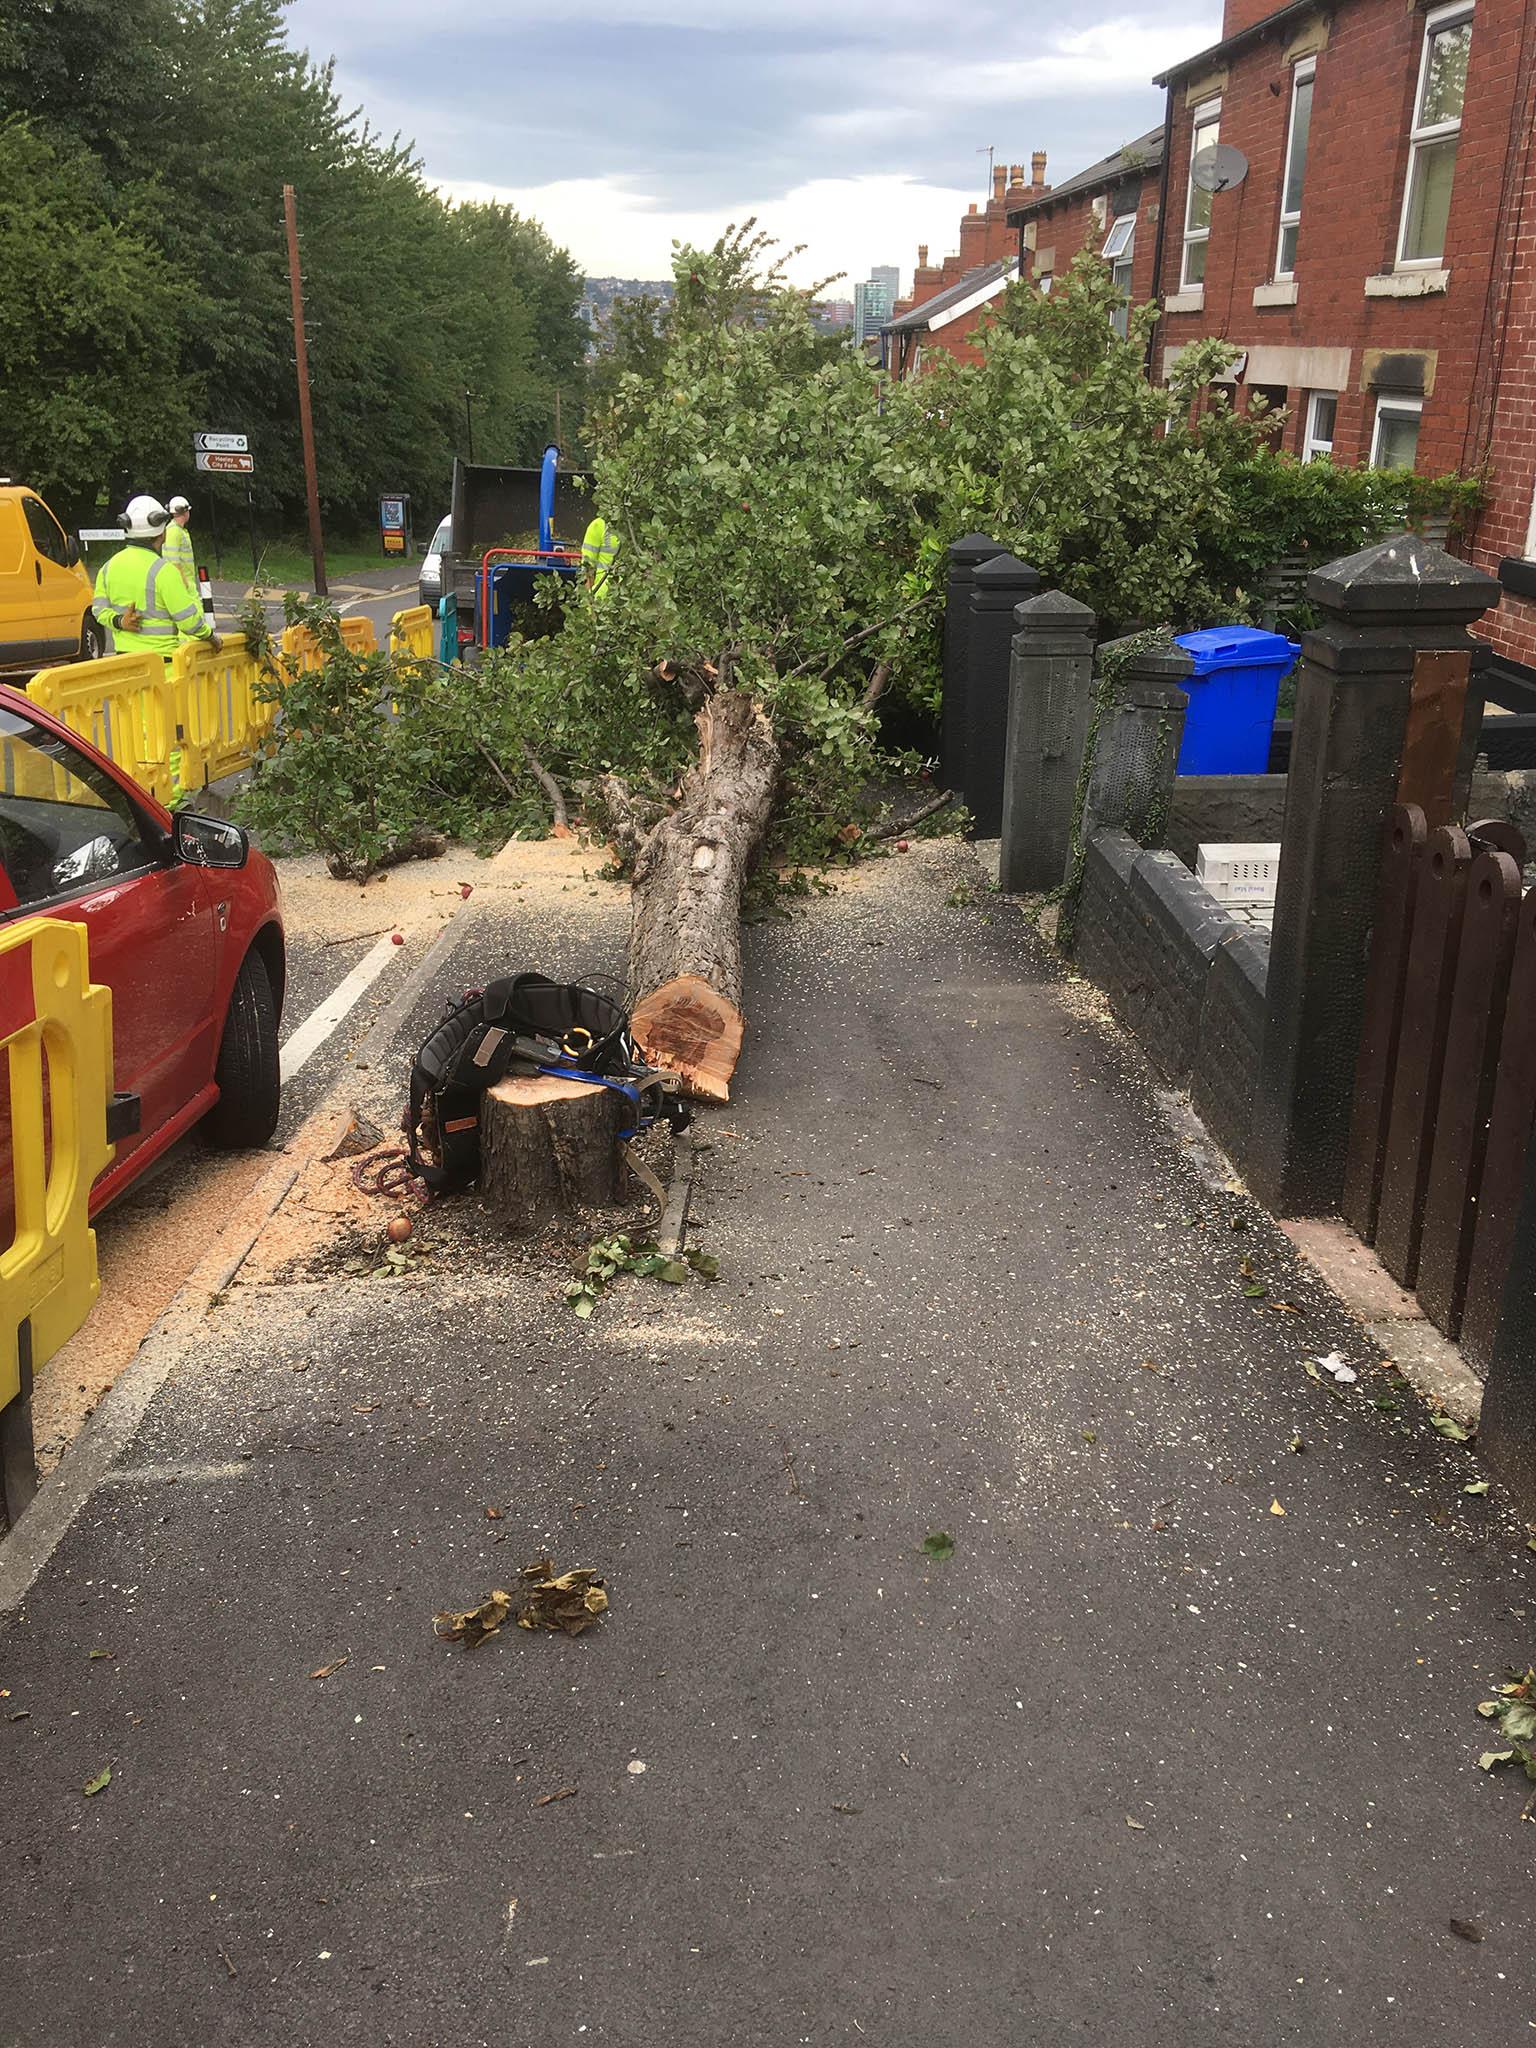 Targeted trees, the council argued, were either dying, dangerous or had roots causing damage to roads and footpaths